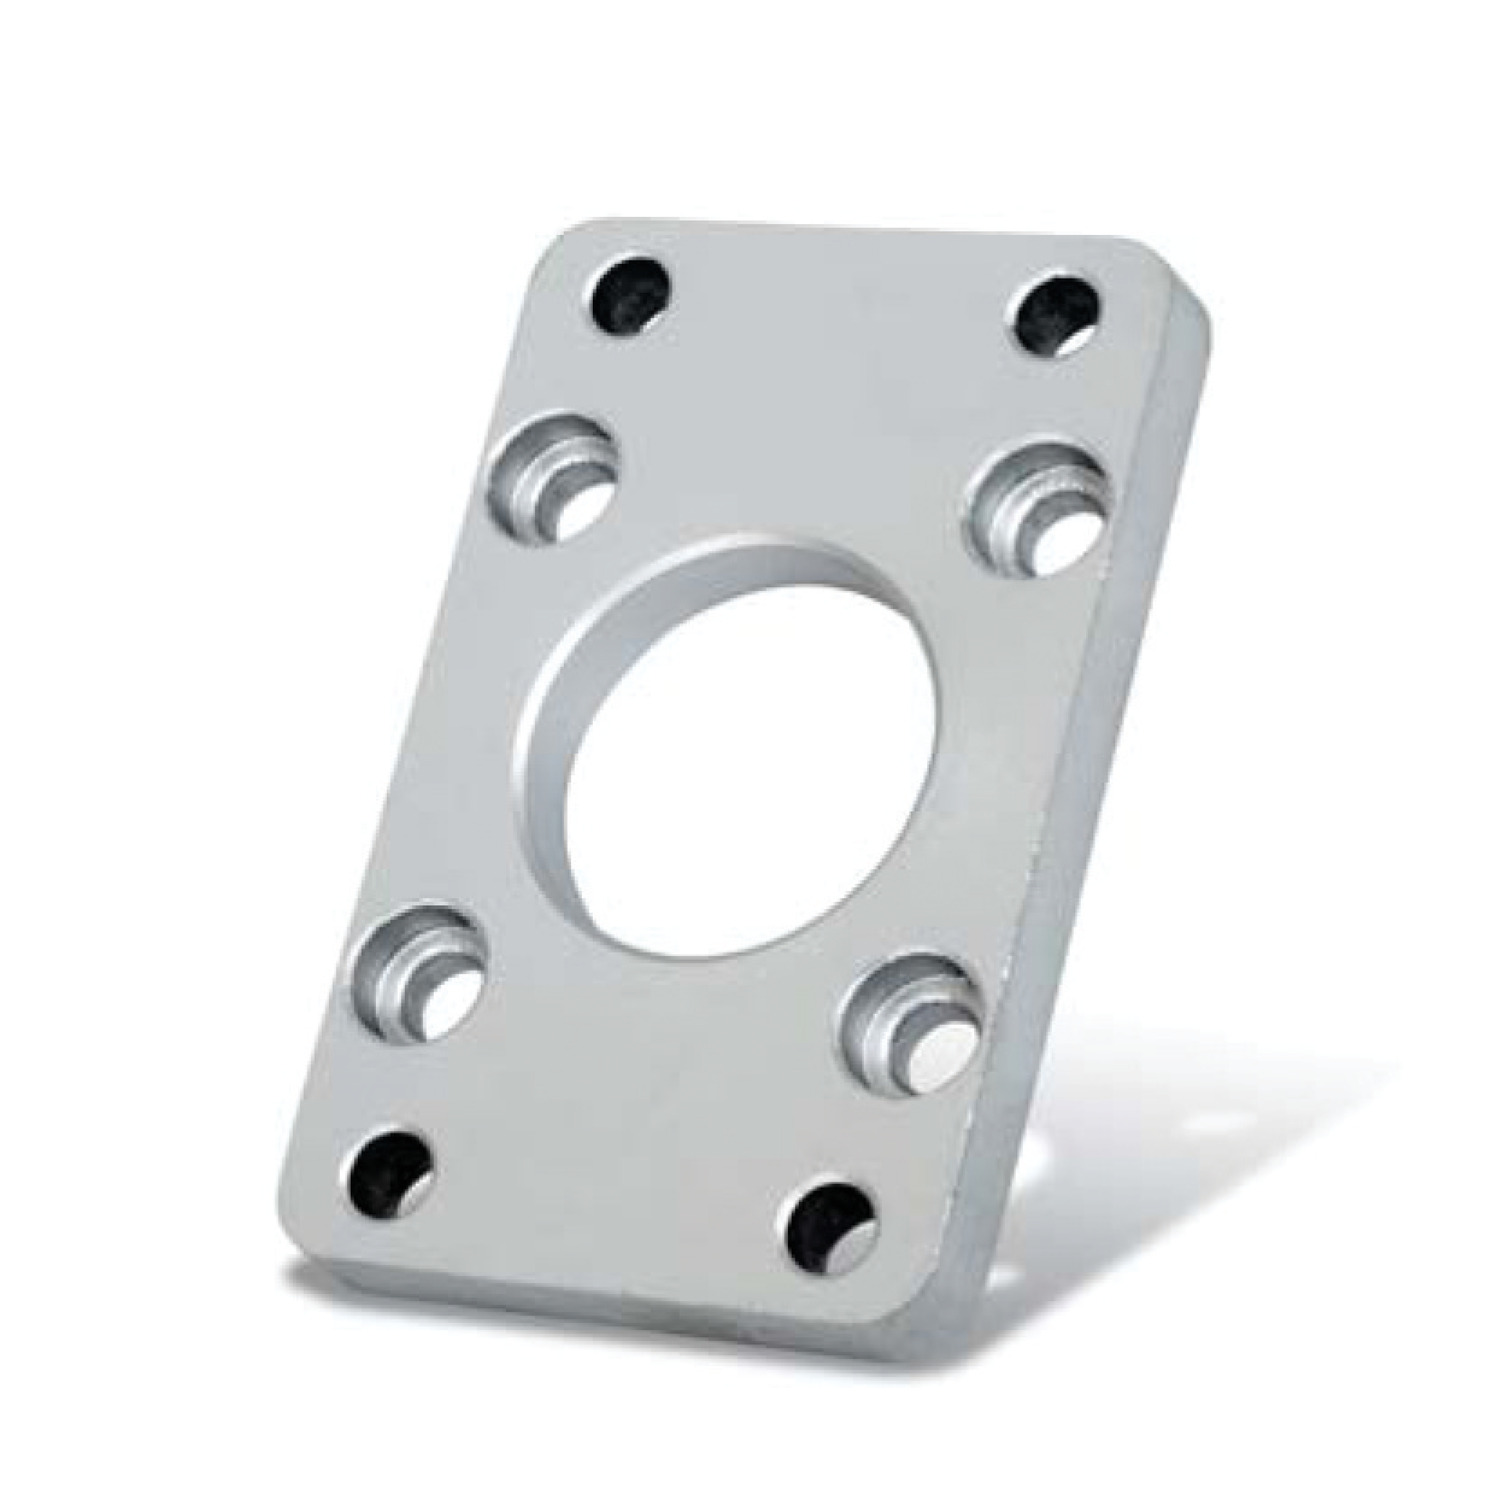 L4814 Air Cylinder Mounts - CETOP Series